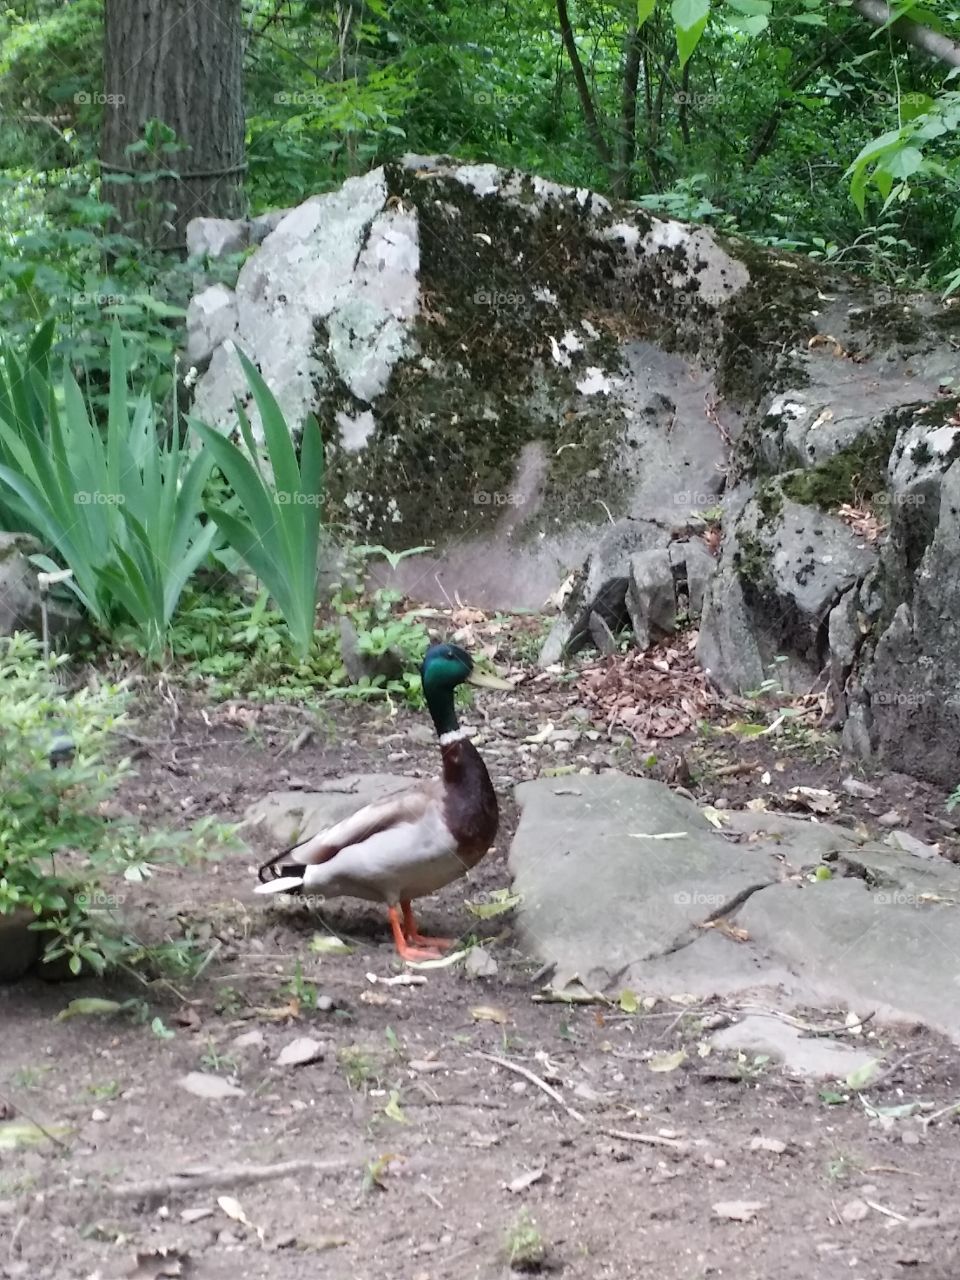 duck in garden. looked out my window and seen this